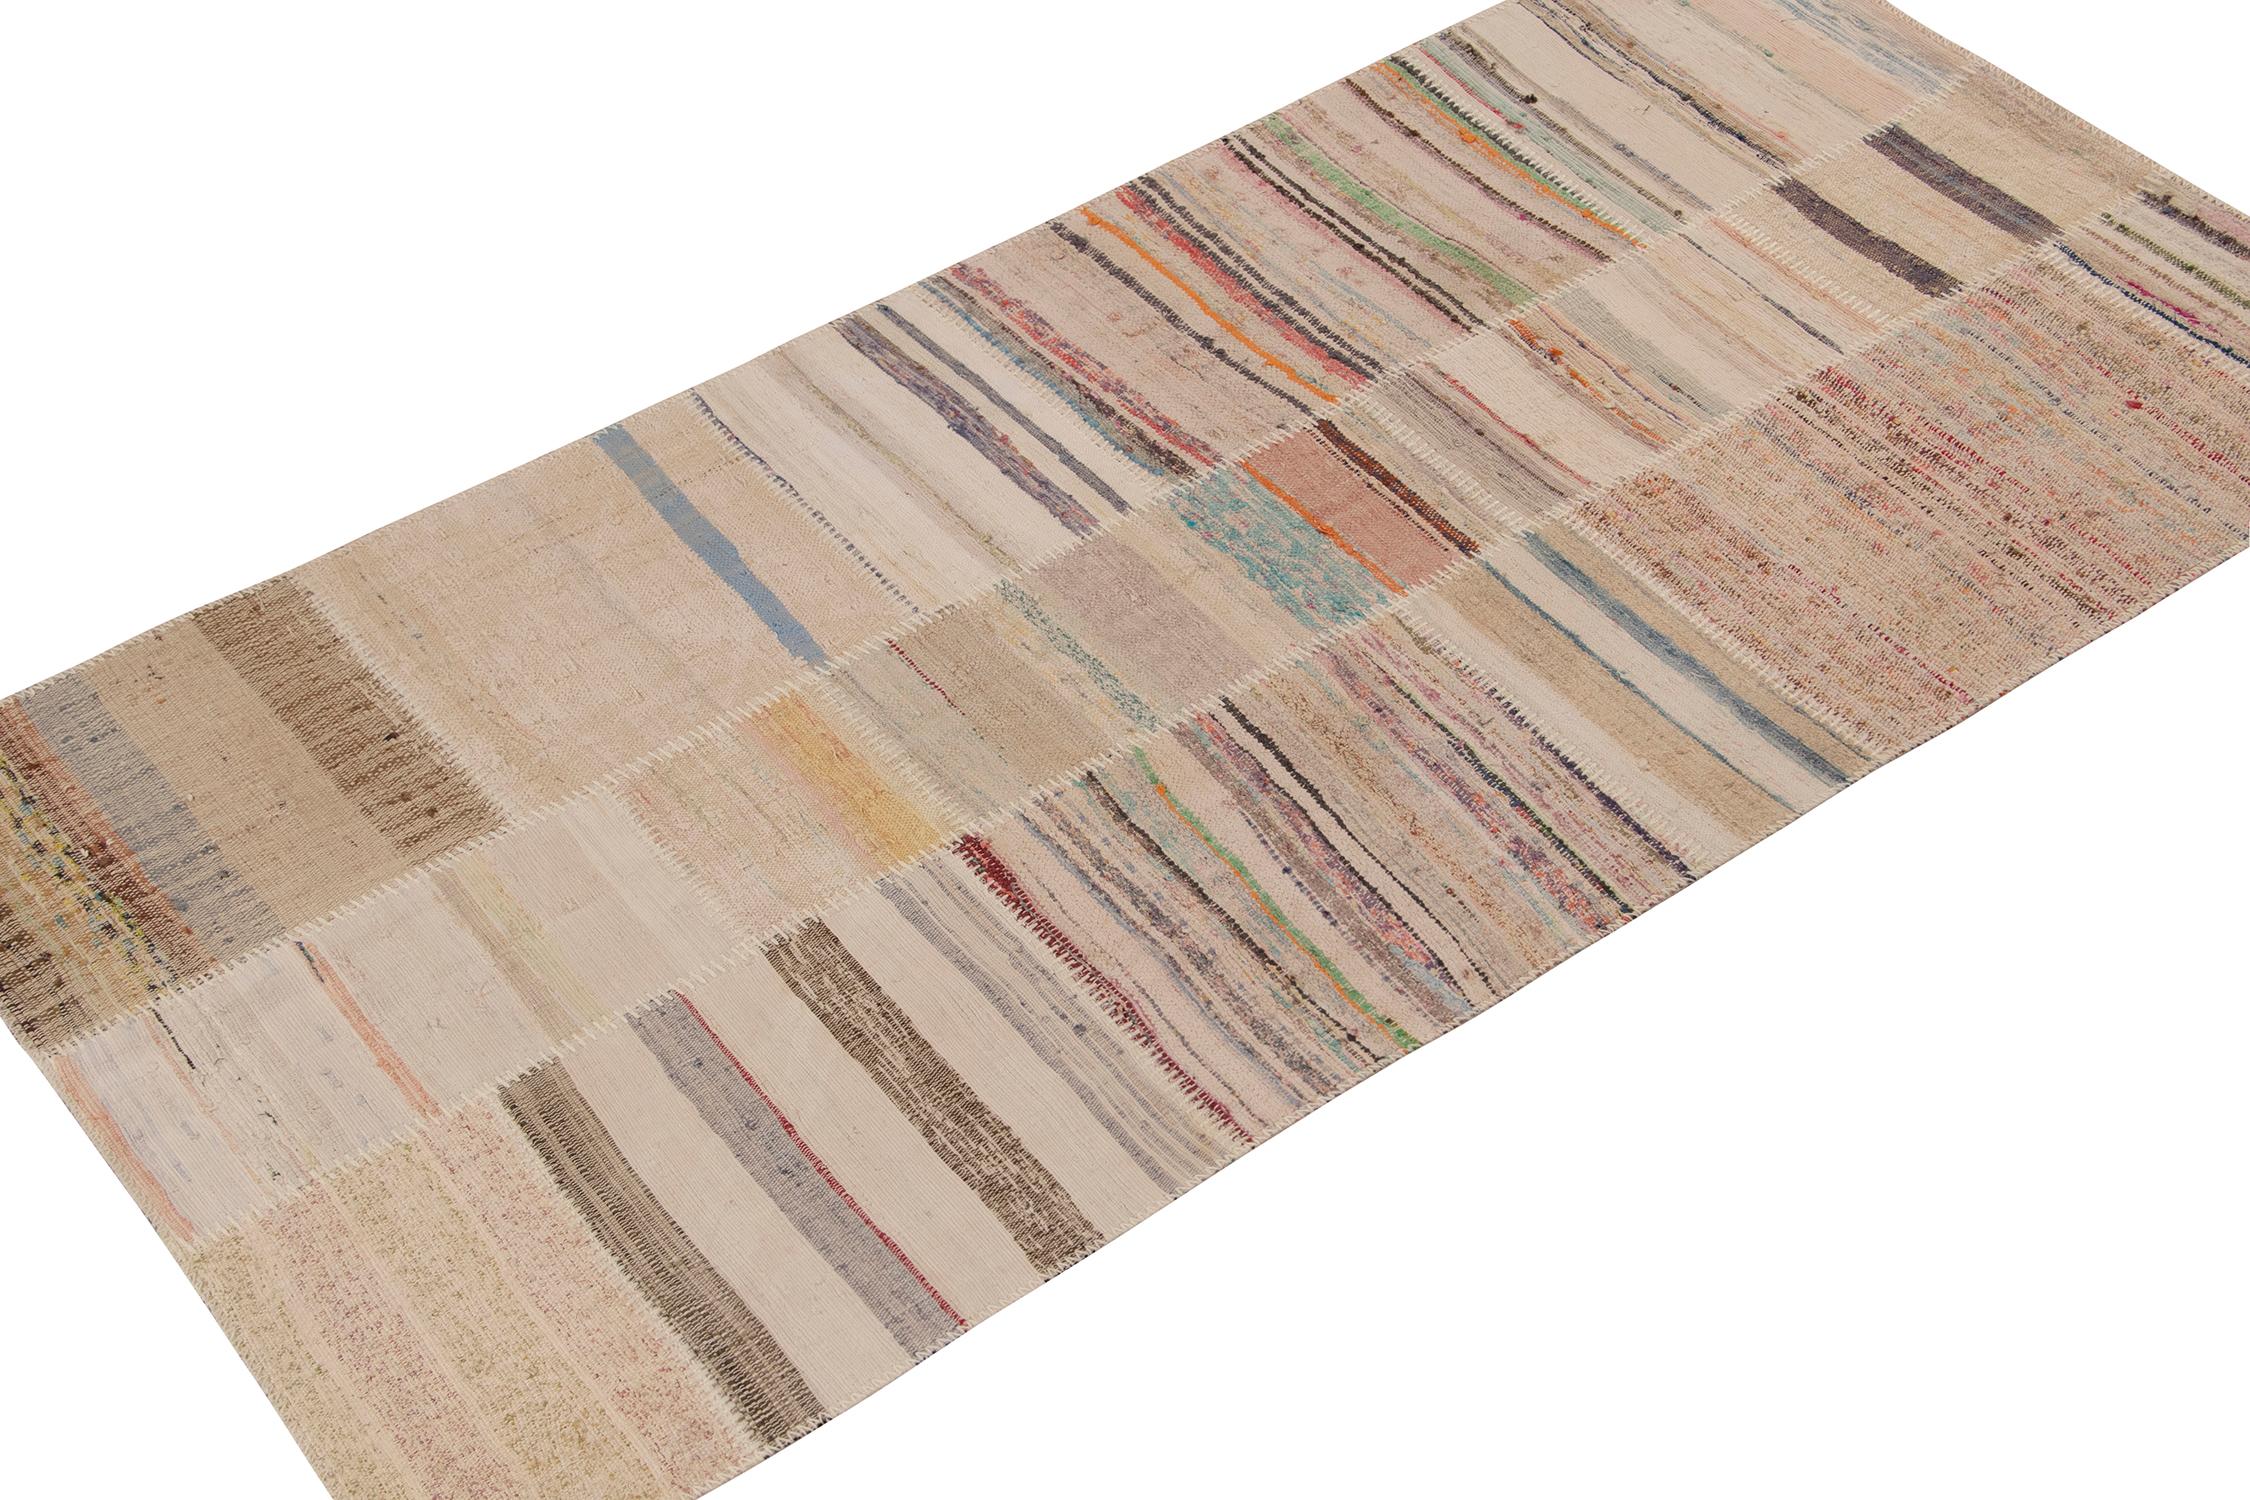 Rug & Kilim presents a contemporary 4x8 rug from their innovative new patchwork kilim collection.
Further On the Design:
This flat weave technique repurposes vintage yarns in polychromatic stripes and striae, achieving a playful look with fabulous